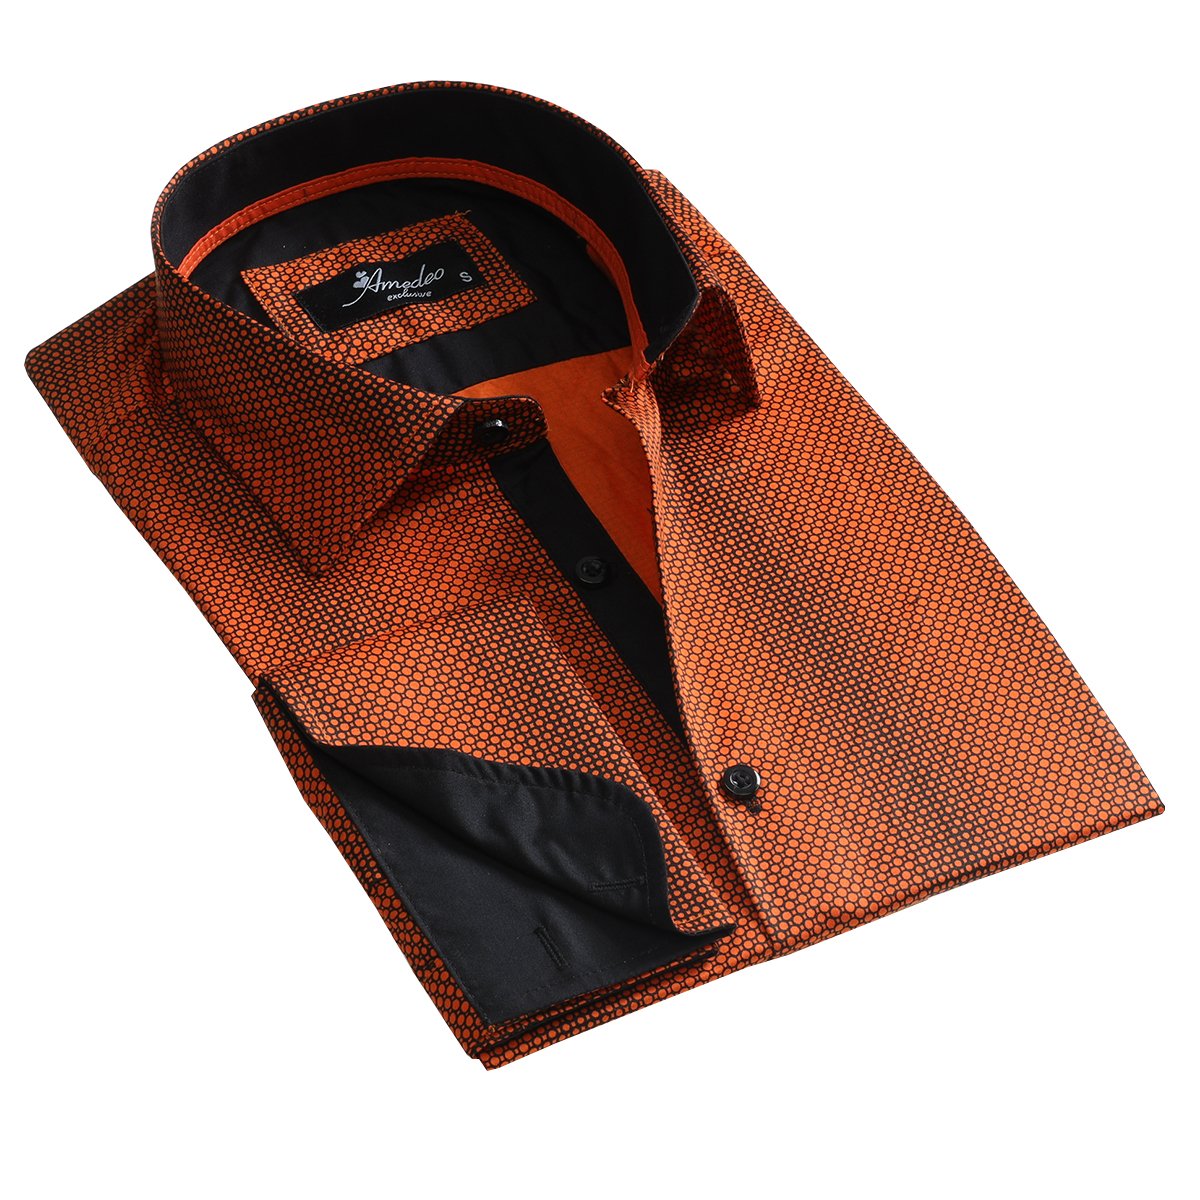 Orange Design Mens Slim Fit French Cuff Dress Shirts with Cufflink Holes - Casual and Formal - Amedeo Exclusive